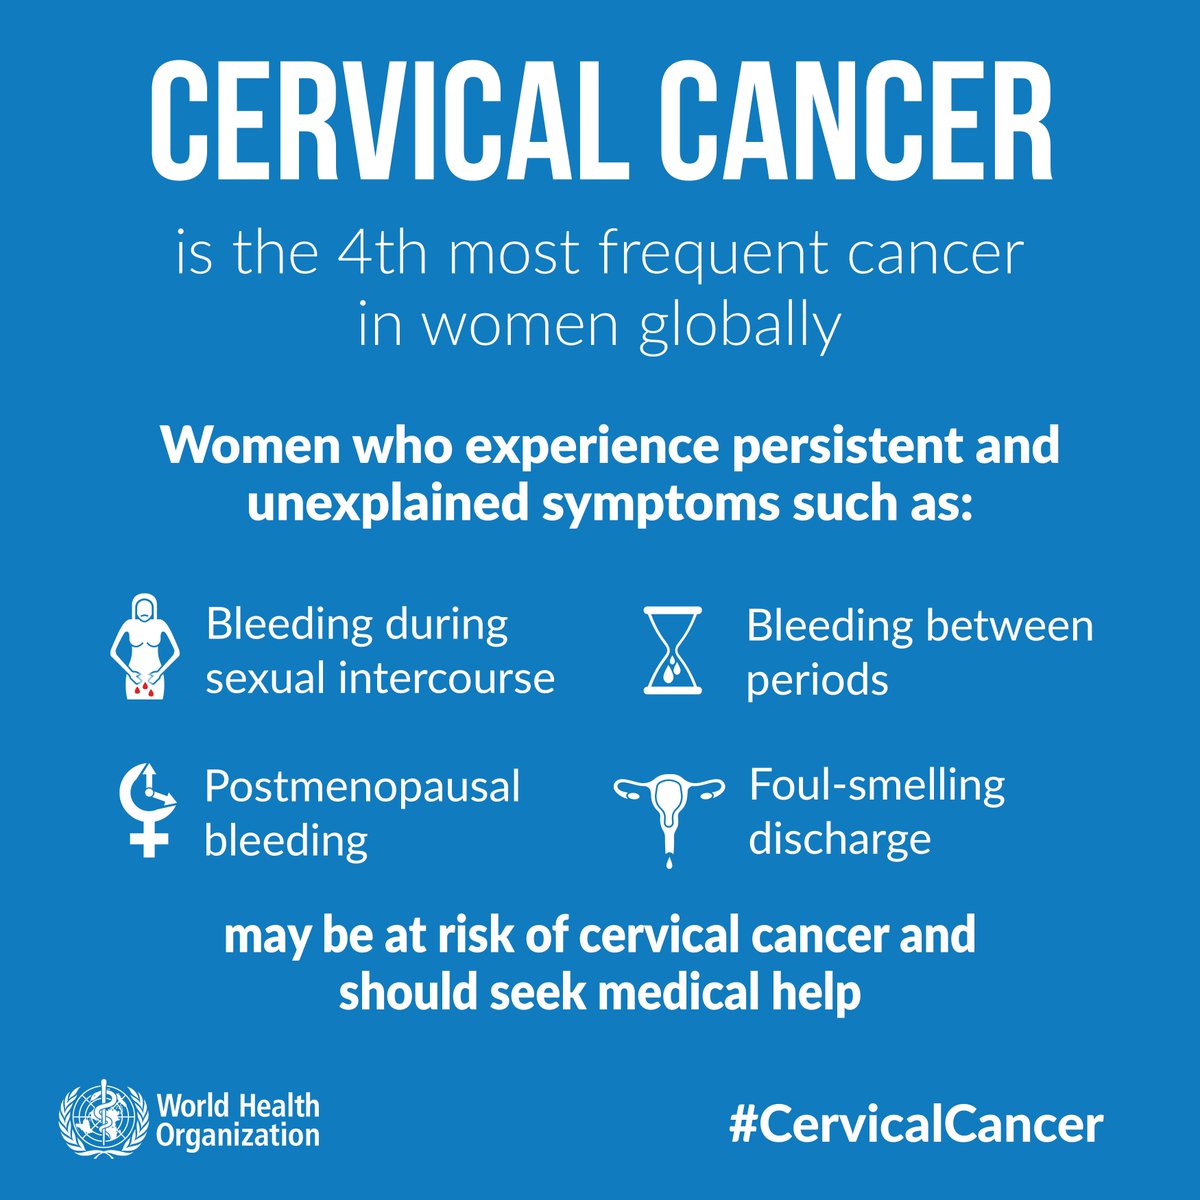 World Health Organization Philippines on X: What are the signs & symptoms  of #CervicalCancer? -Irregular or postmenopausal bleeding -Increased vaginal  discharge Abnormal bleeding doesn't mean you have cervical cancer, but you  should